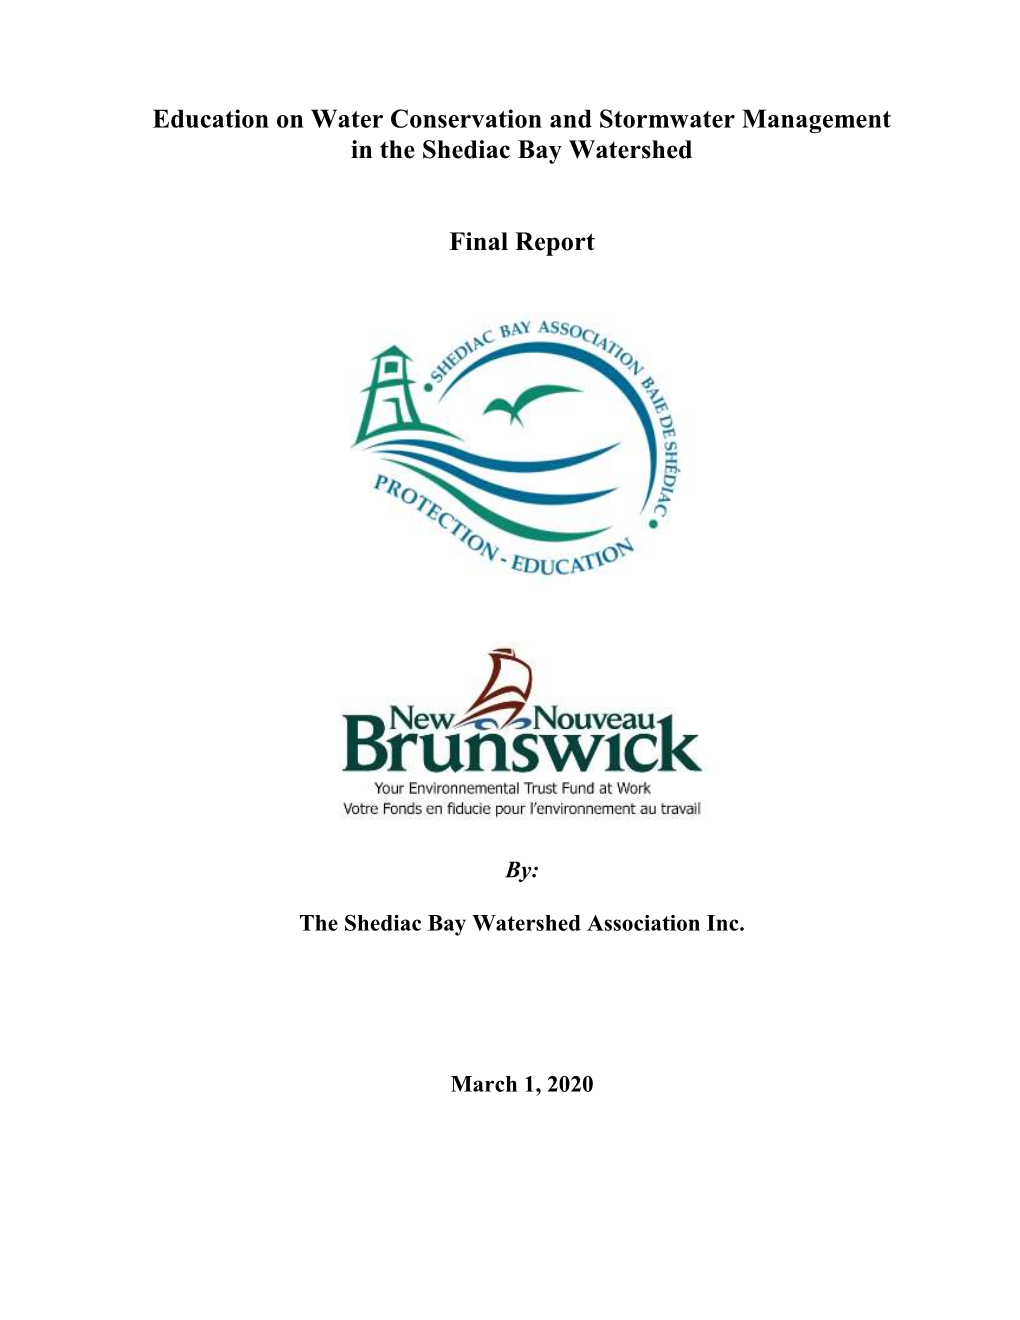 Education on Water Conservation and Stormwater Management in the Shediac Bay Watershed